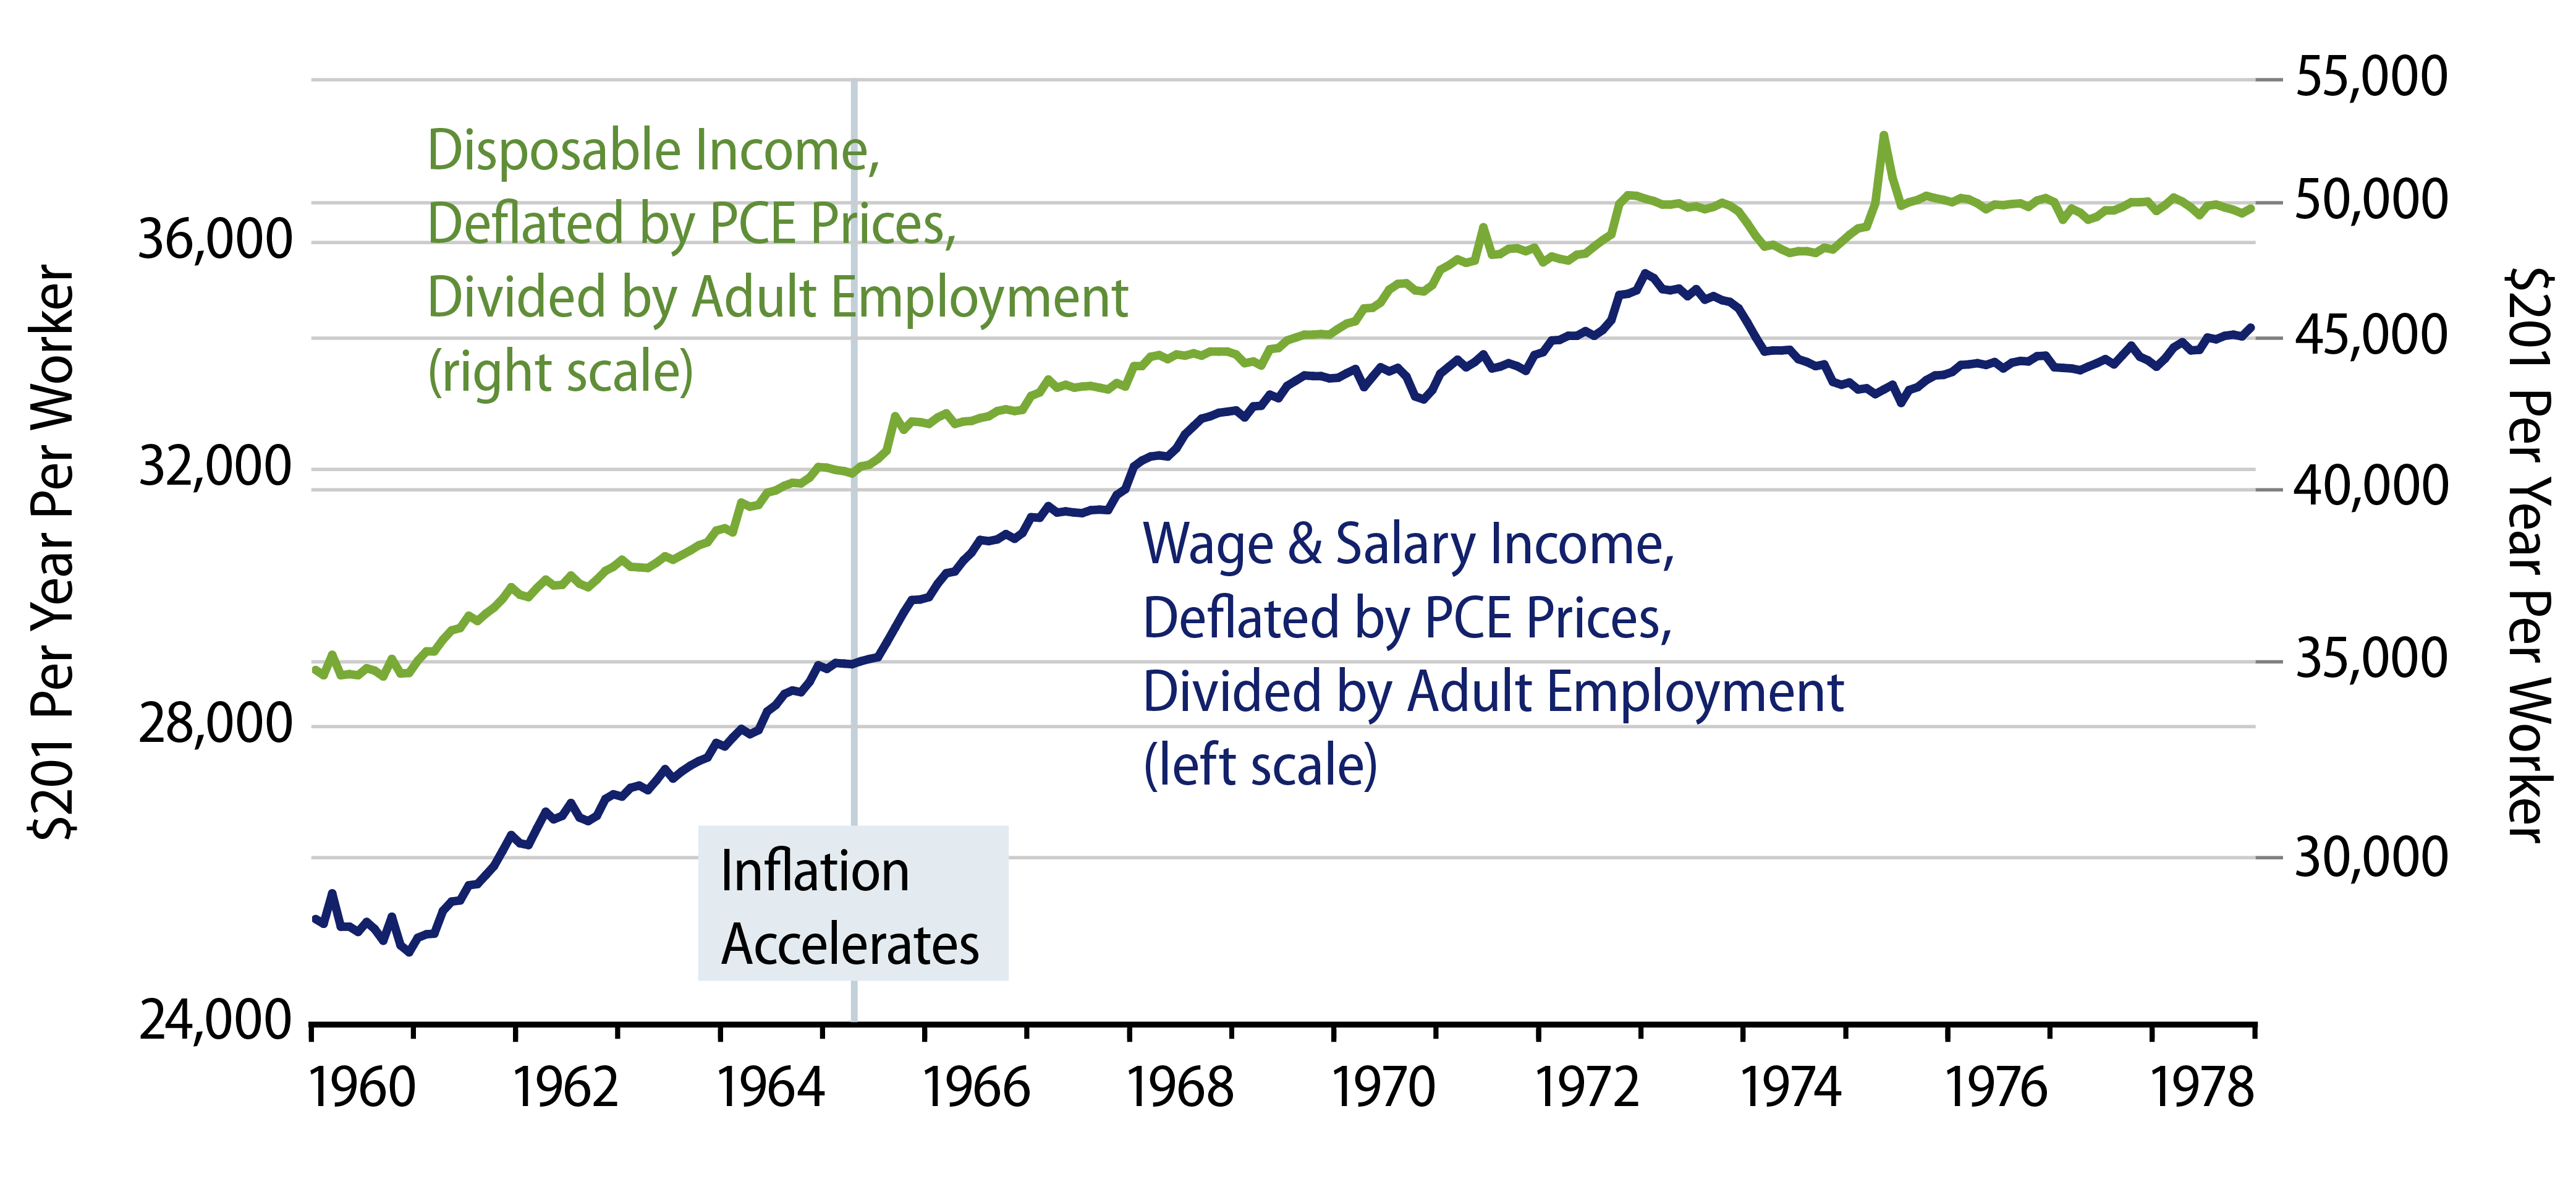 Real Income Per Worker During 1960s/1970s Inflation